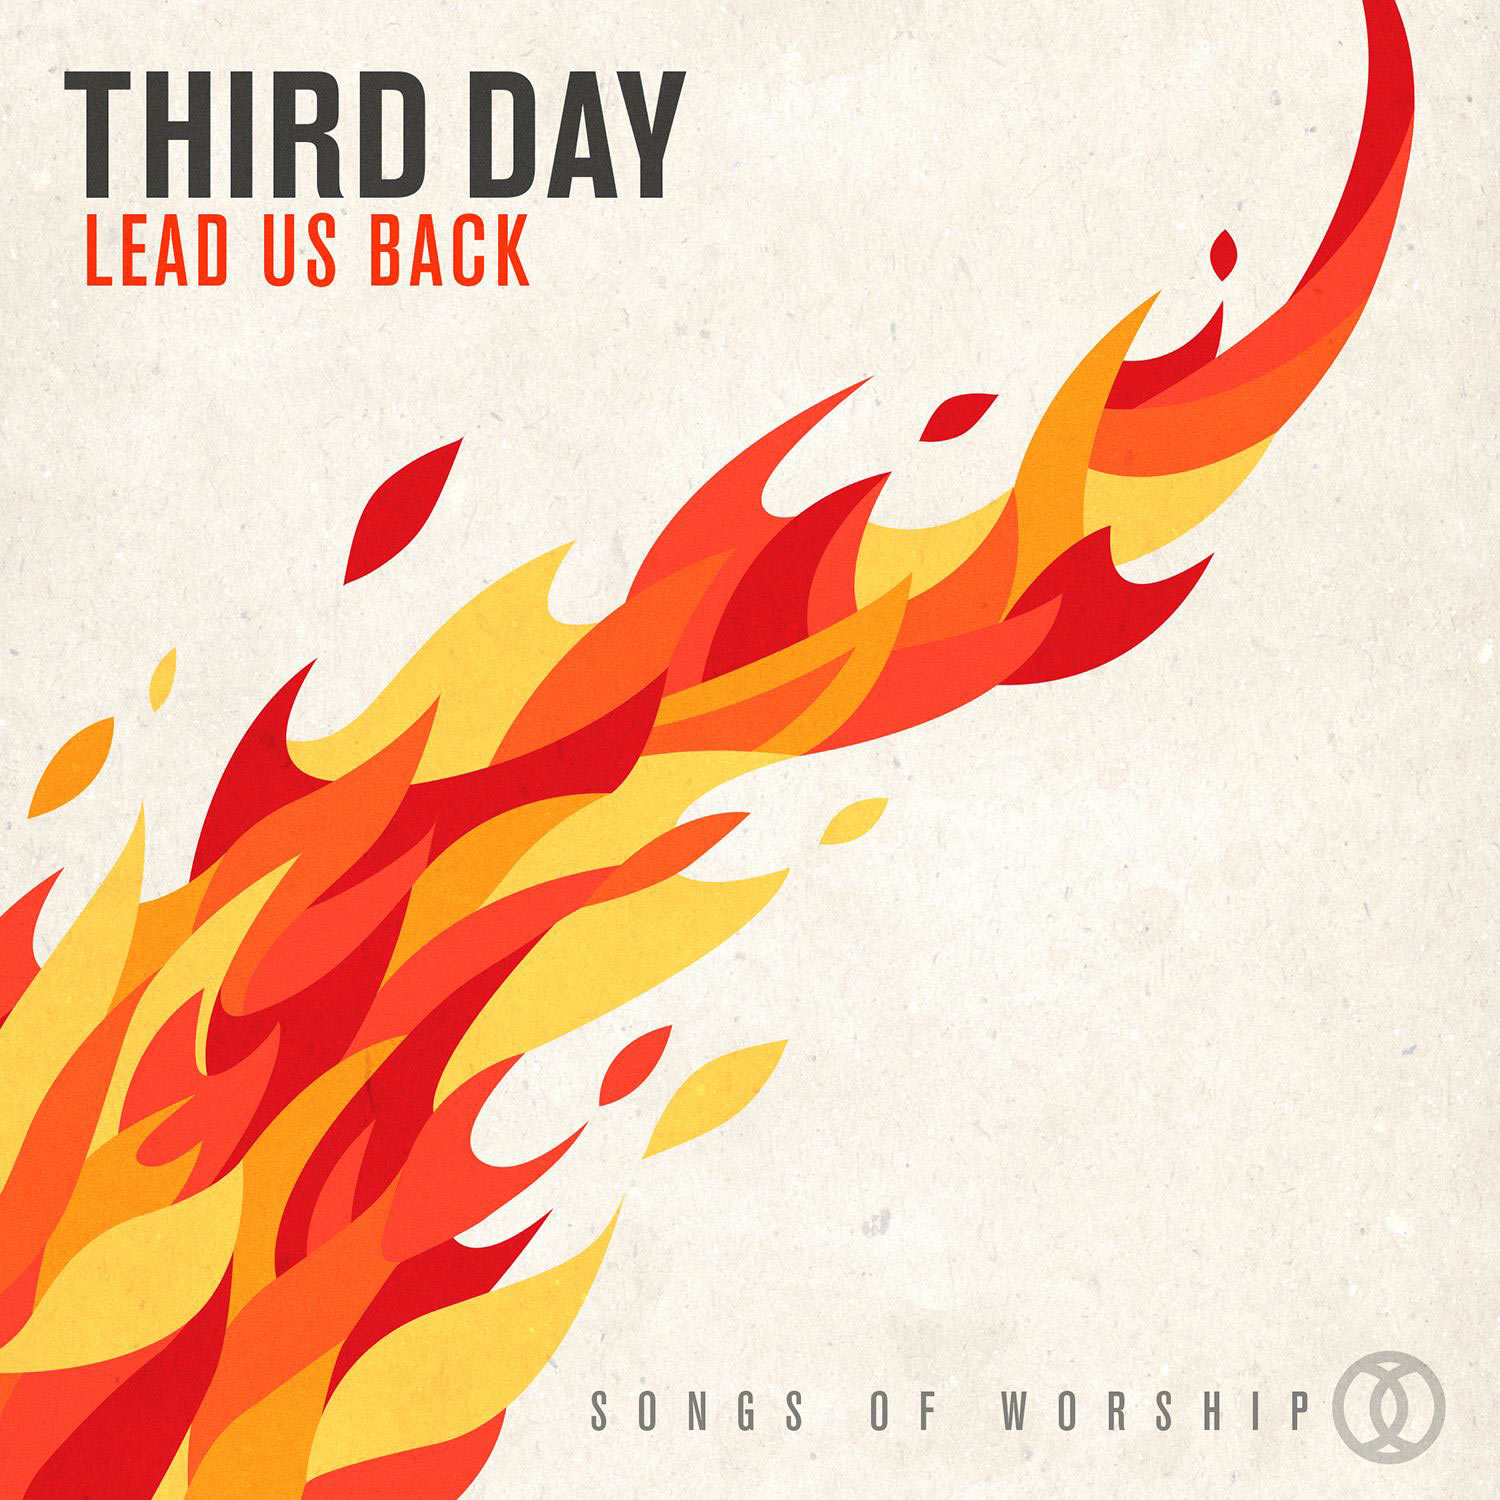 THIRD DAY LEAD US BACK